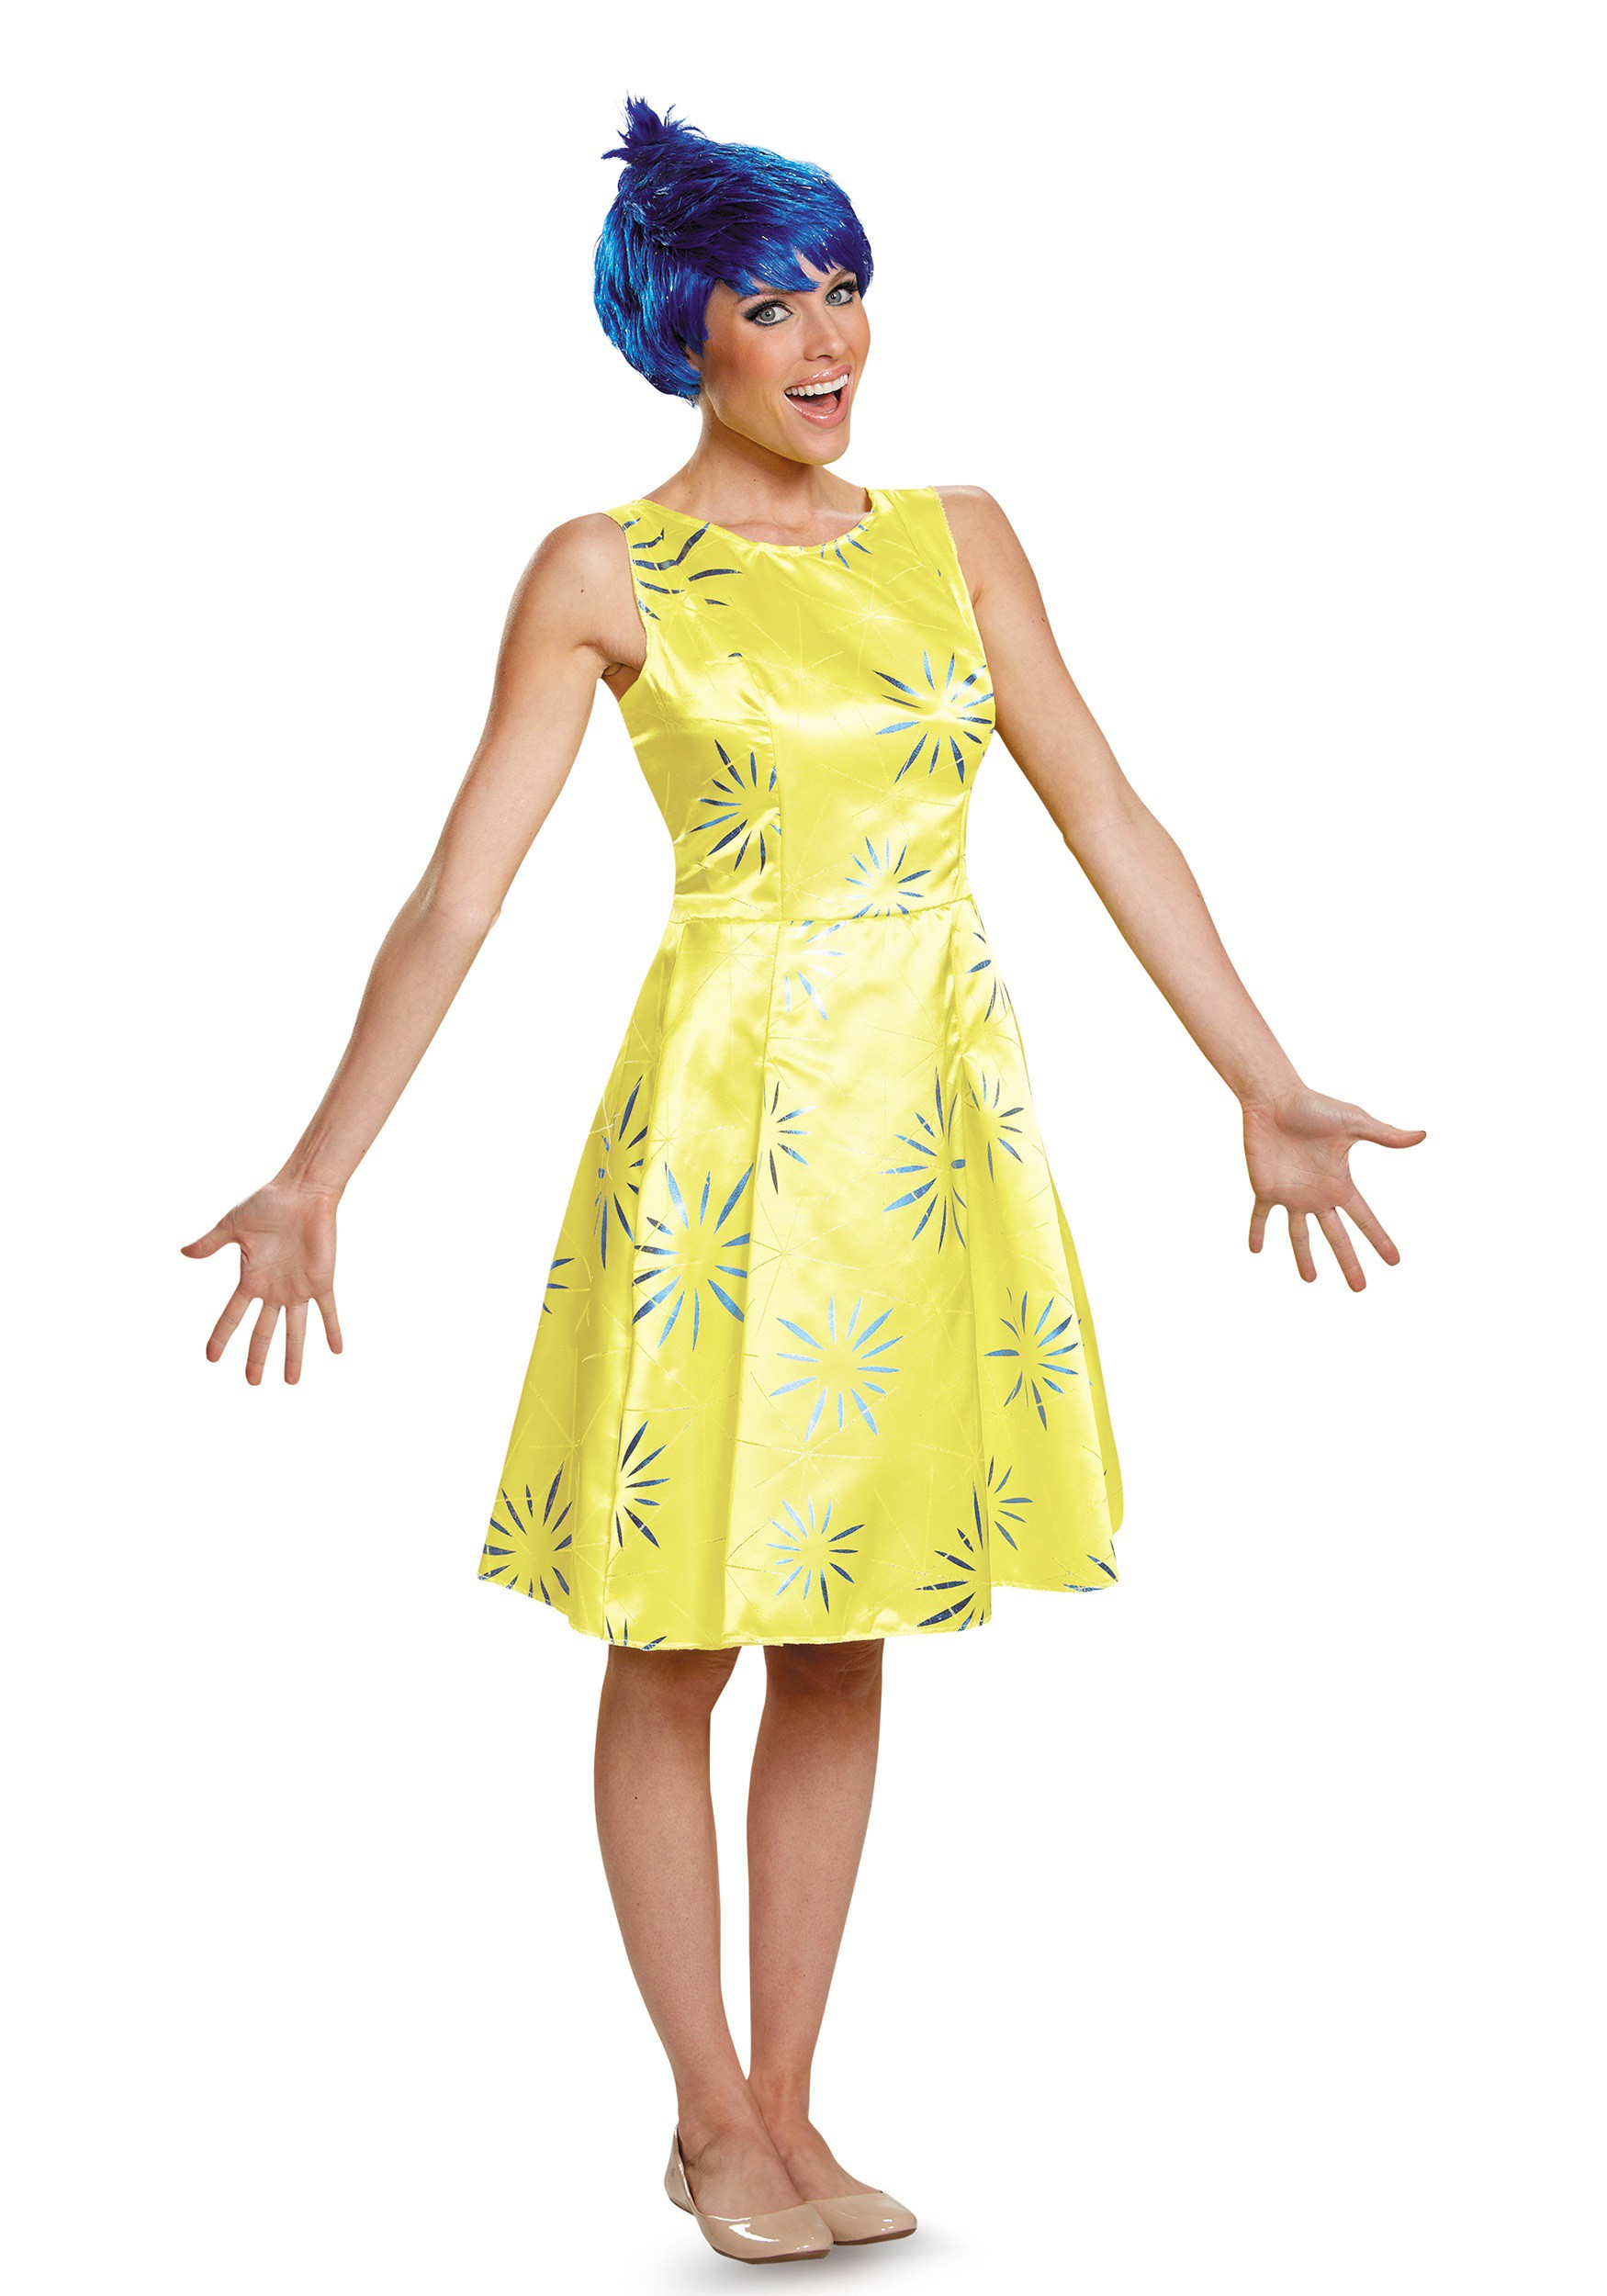 Image of Adult Disney Inside Out Joy Deluxe Costume | Disney Costumes ID DI86954-S